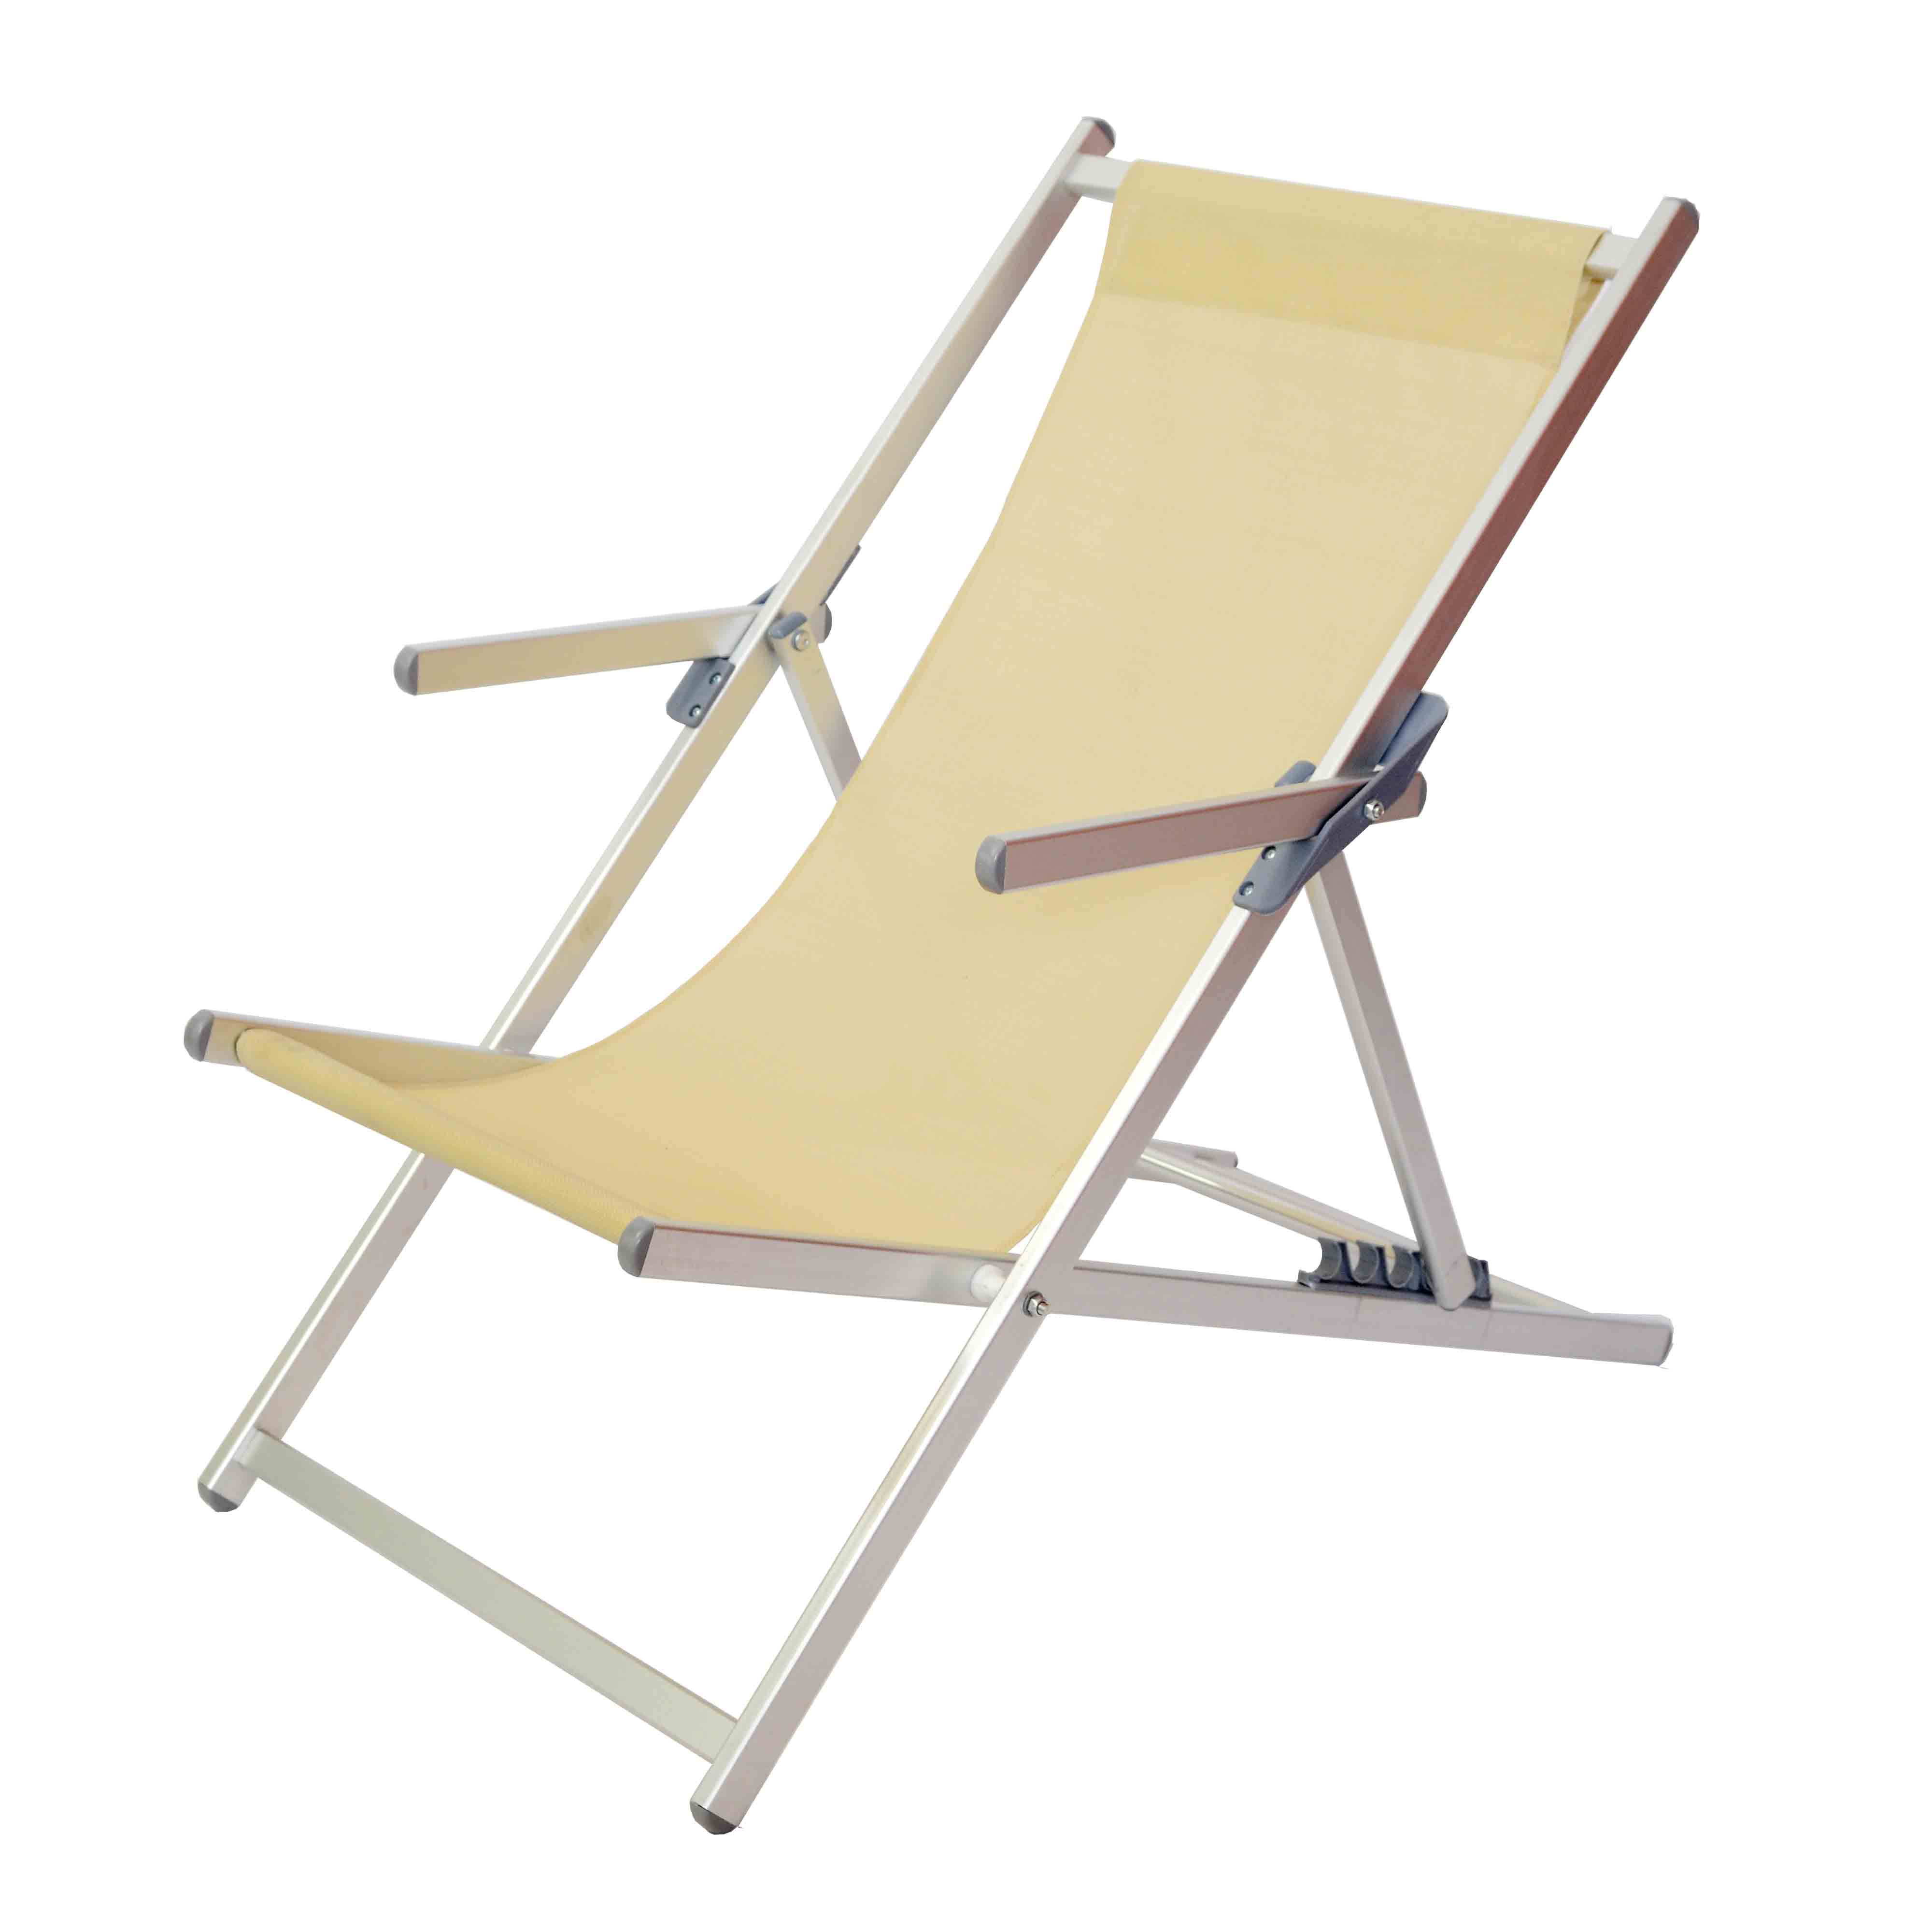 China Wholesale Outdoor Sofa Chair Manufacturers - JJLXS-036 Aluminum camping folding chair – Jin-jiang Industry